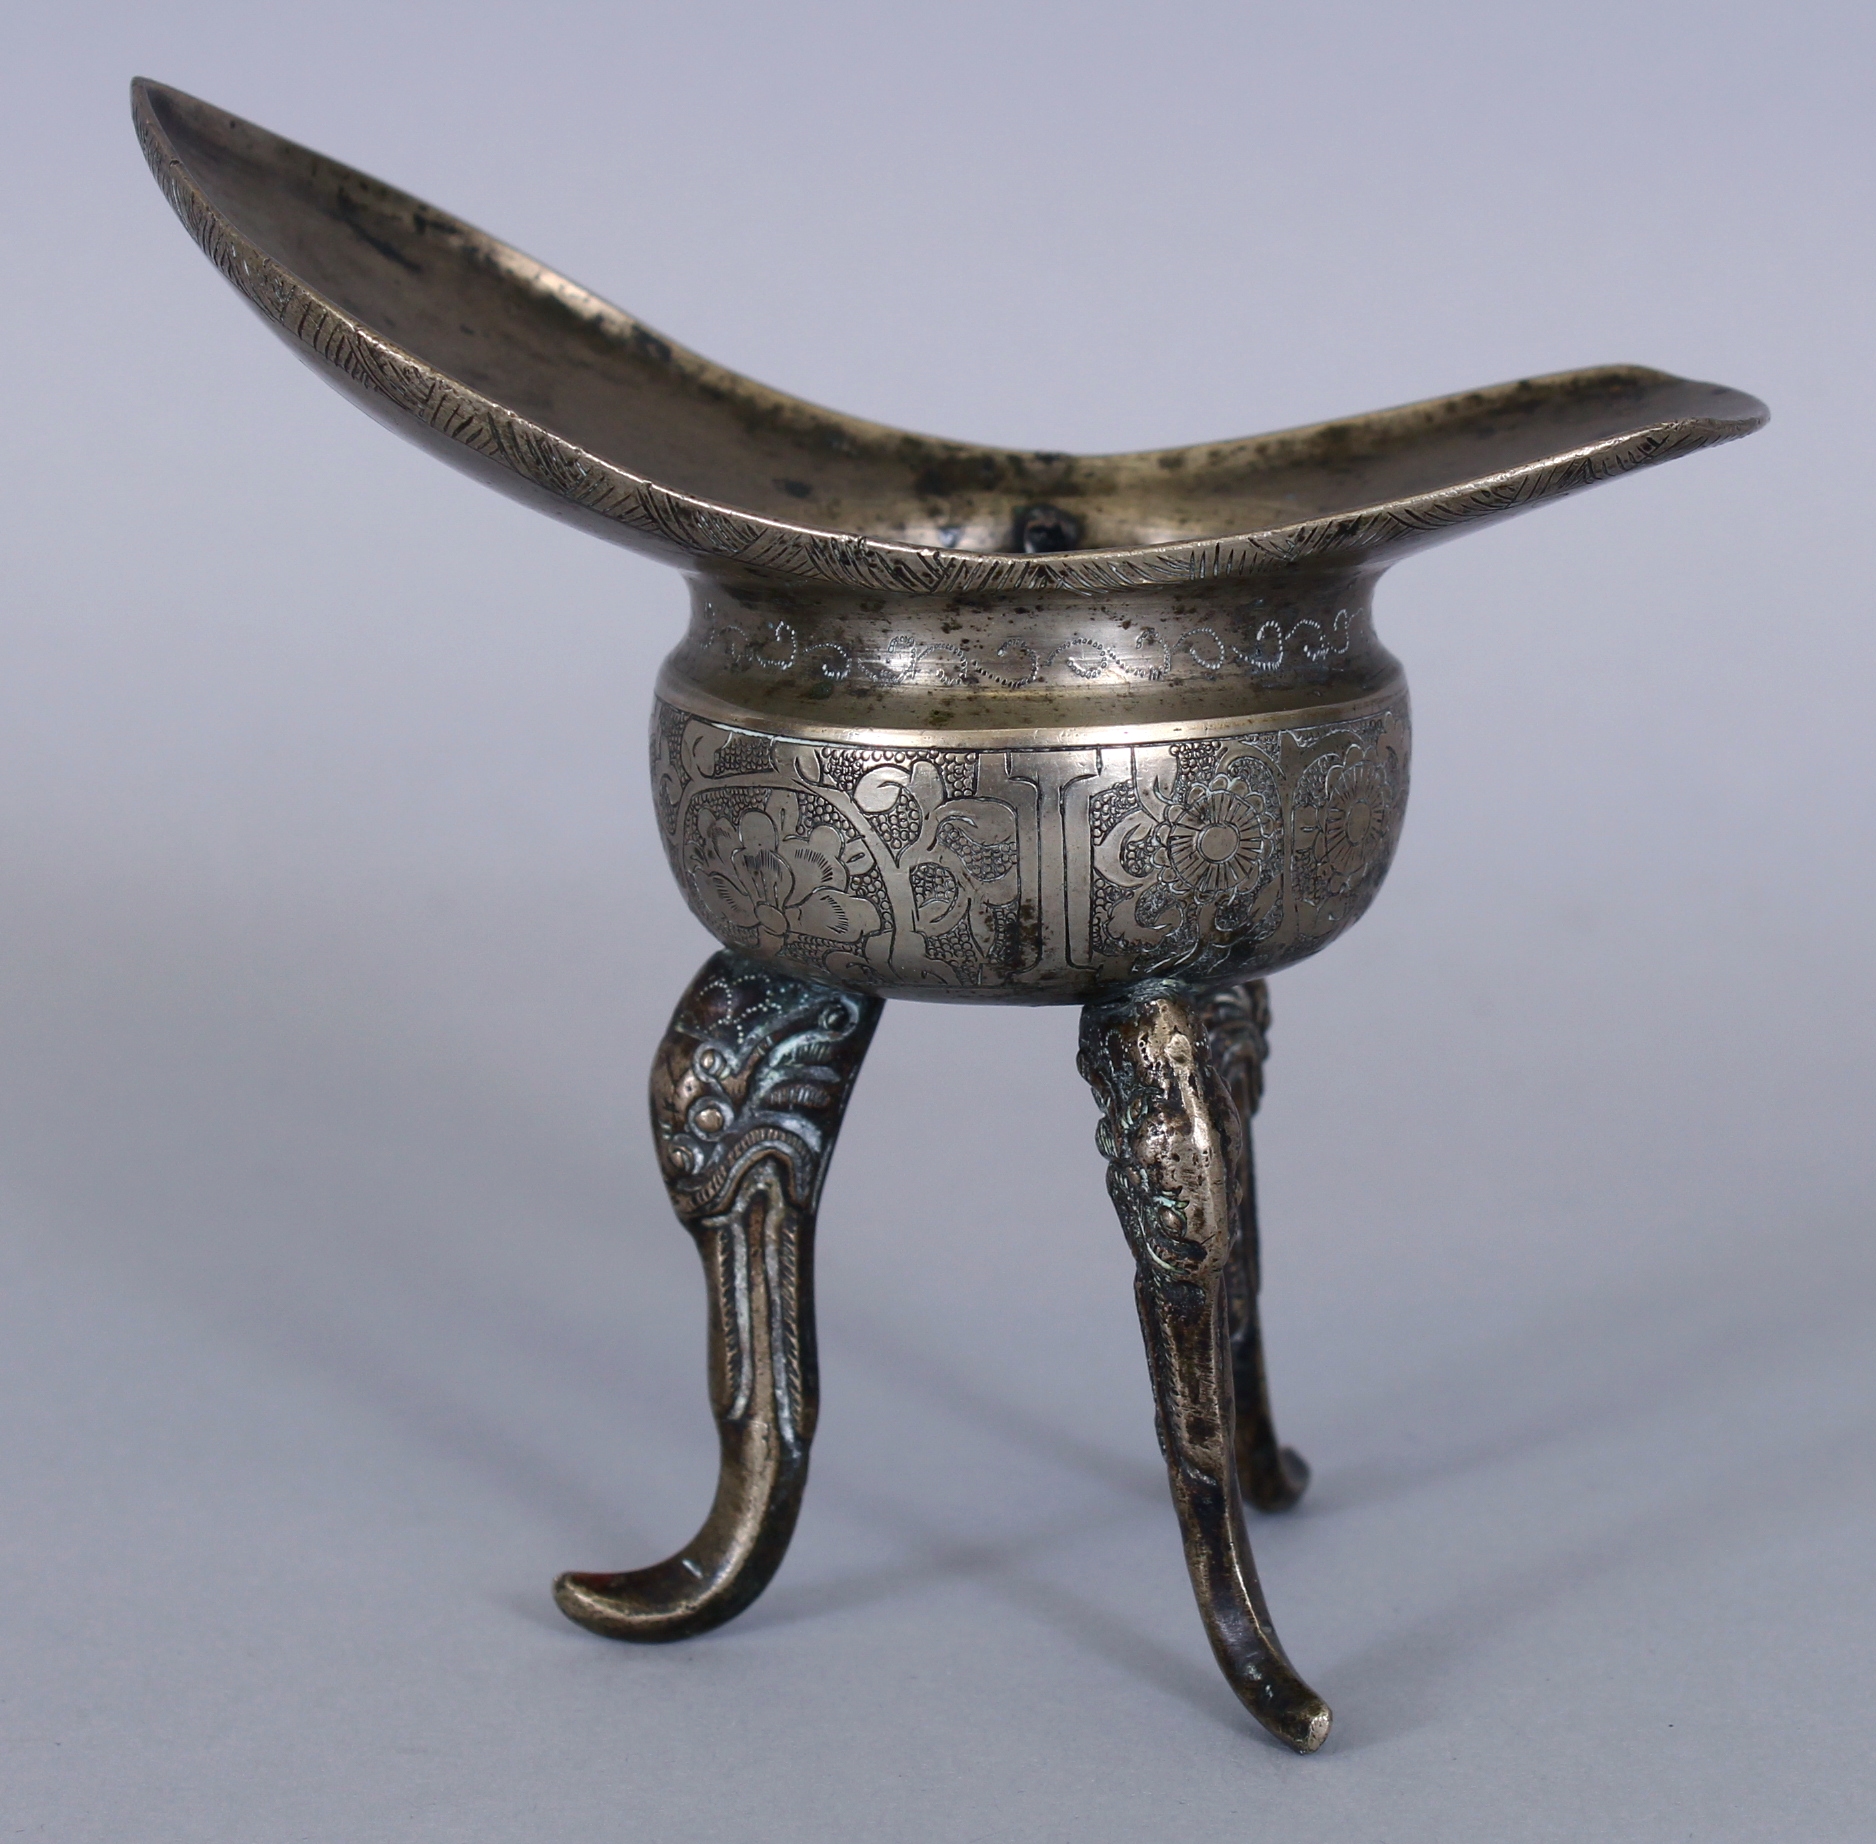 AN UNUSUAL 18TH/19TH CENTURY CHINESE OR TIBETAN SILVERED METAL PAKTONG JUE TRIPOD CENSER, the - Image 2 of 9